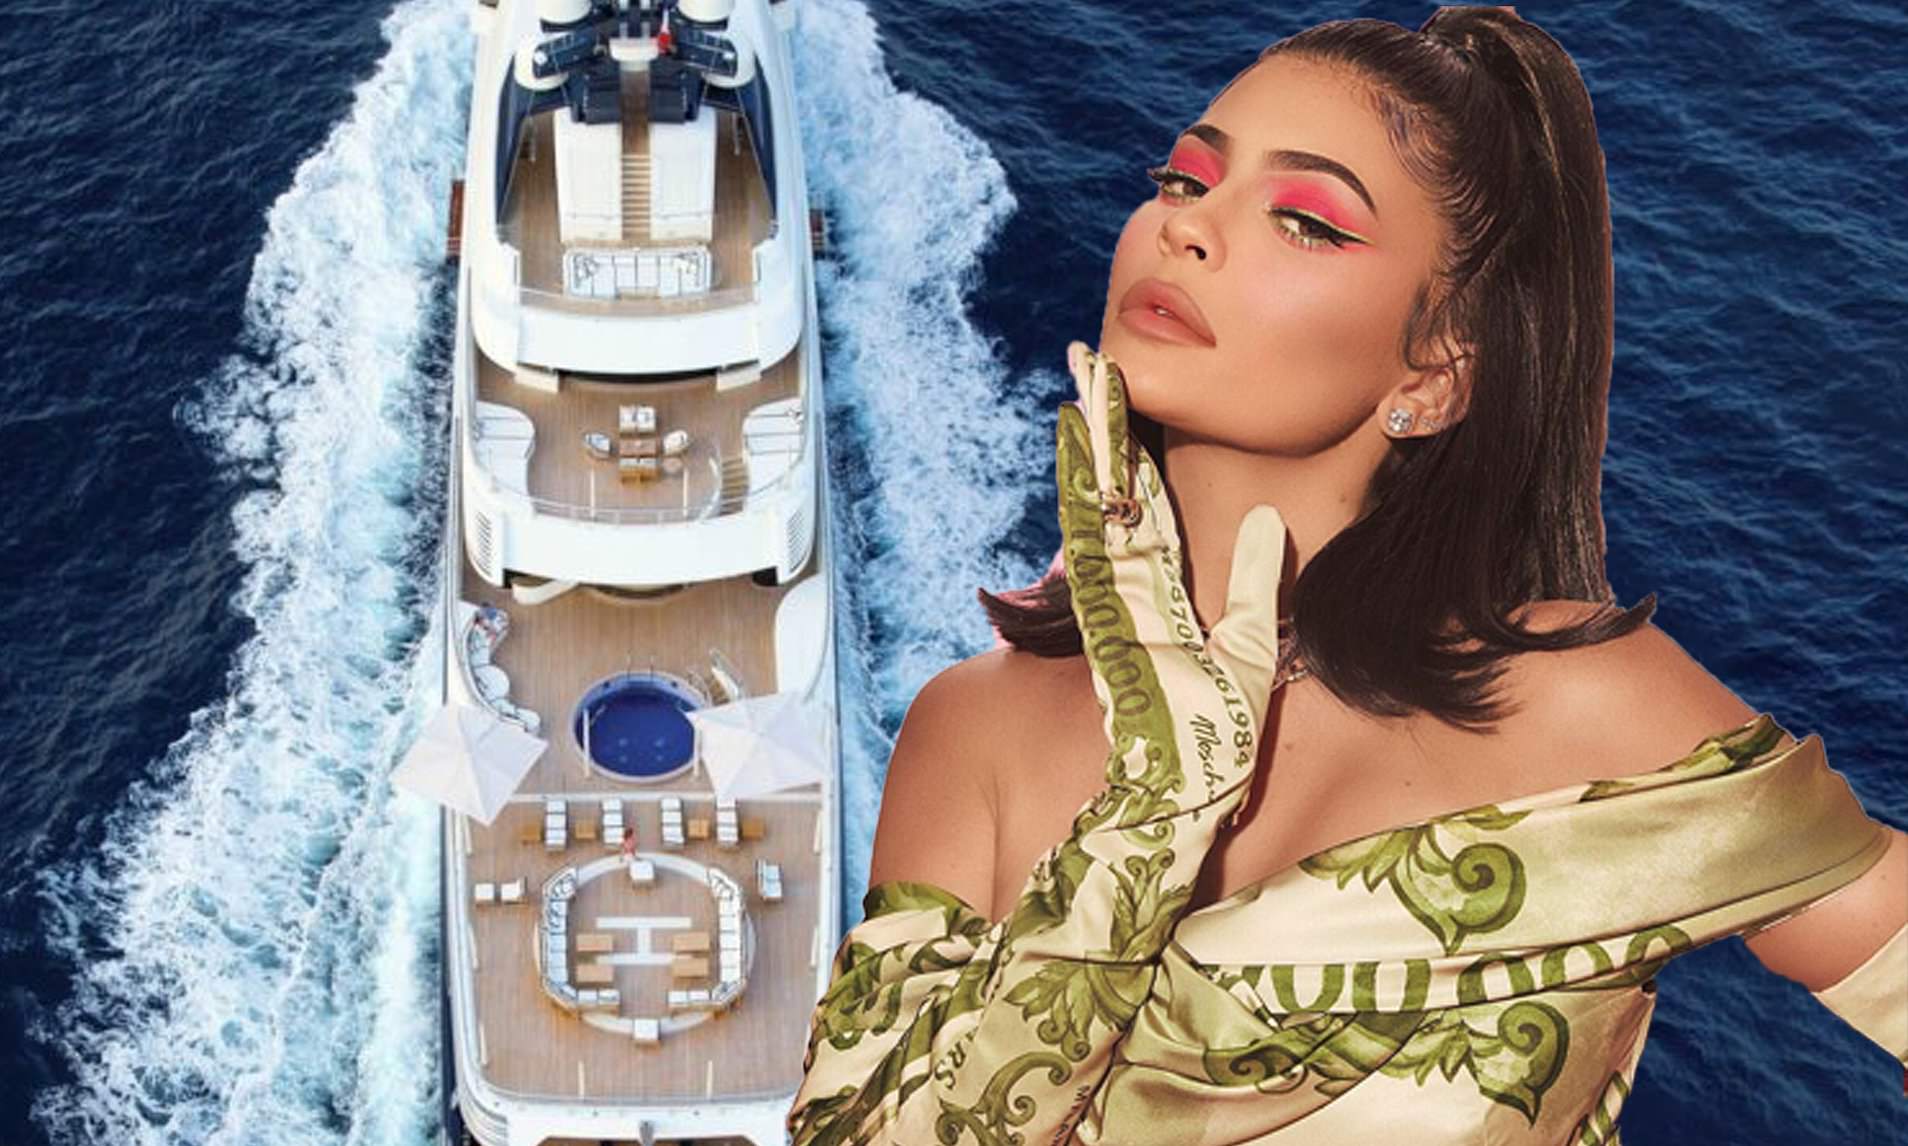 Kylie Jenner hires $250m 'Super-Yacht' for 22nd birthday